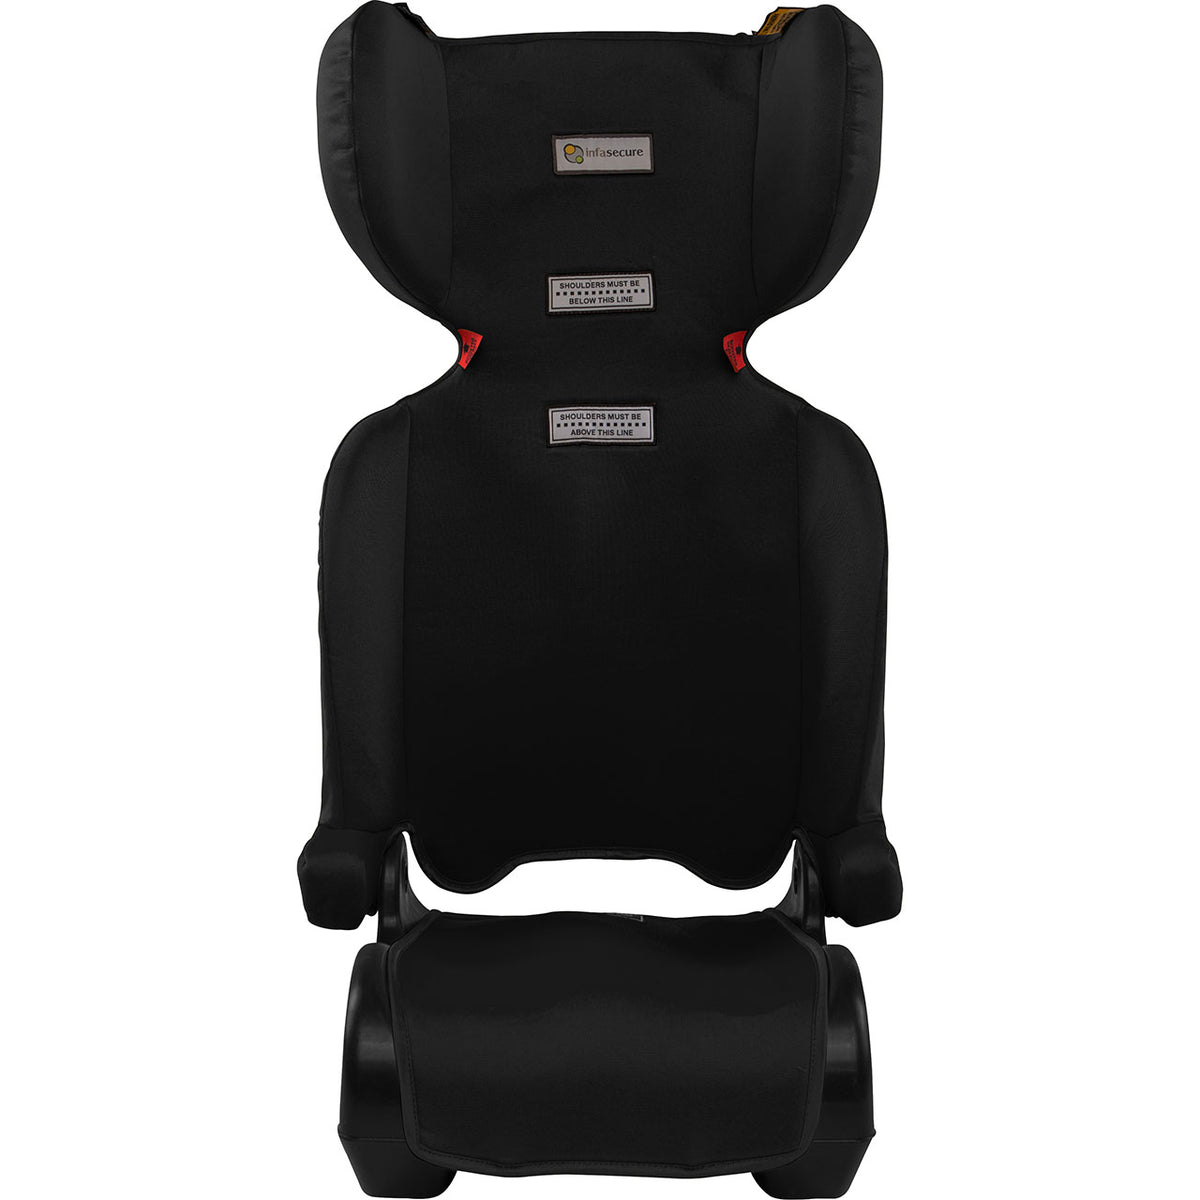 infa secure booster seat